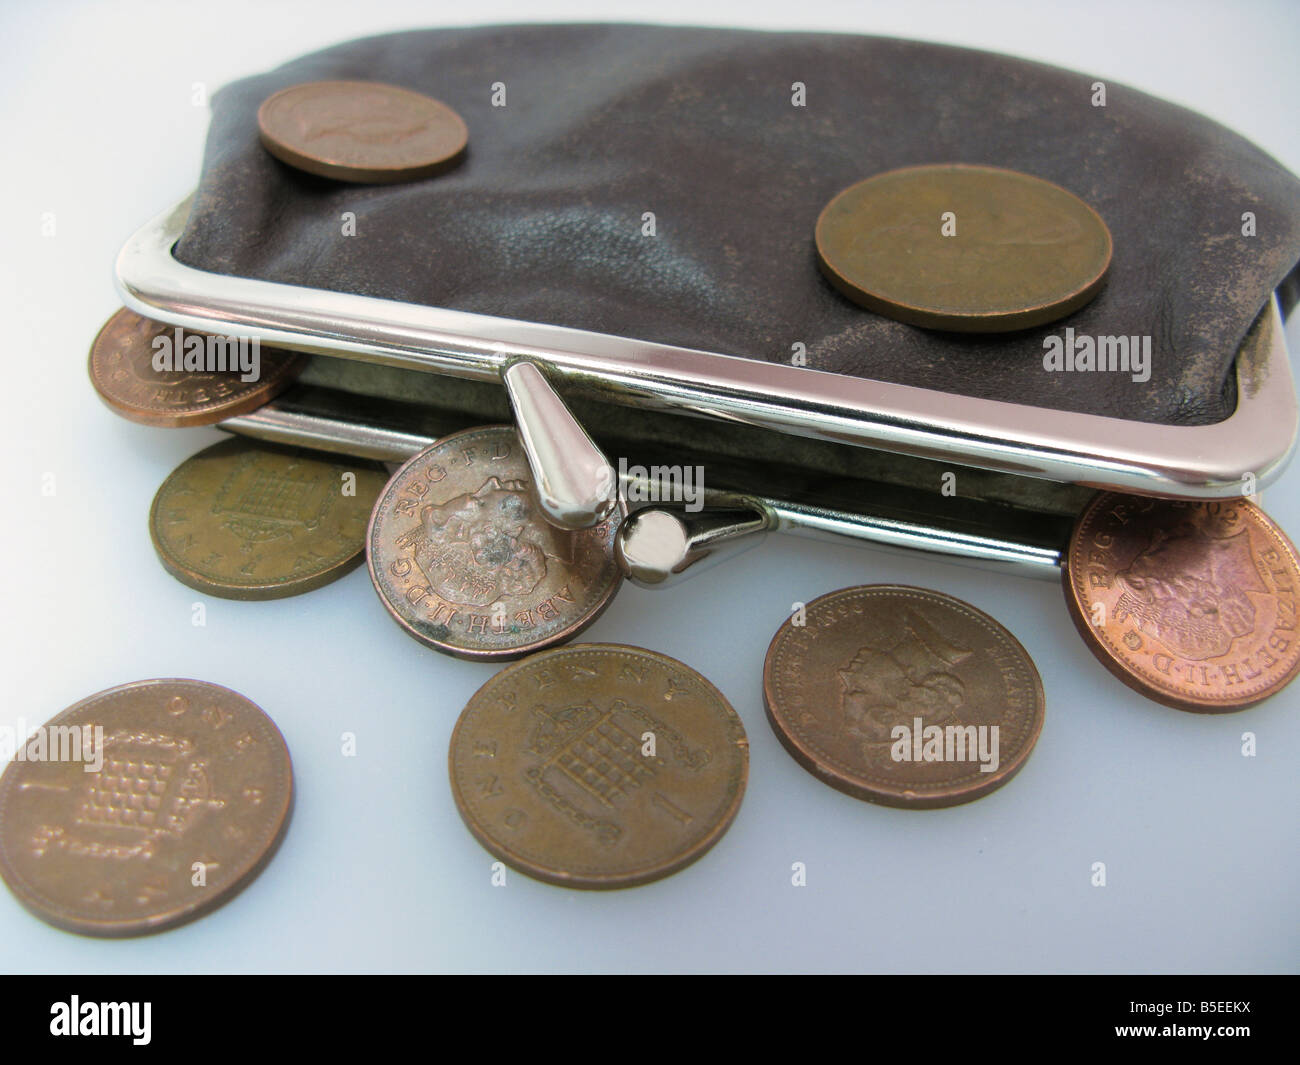 battered old purse with coins in the credit crunch hardship times Stock Photo